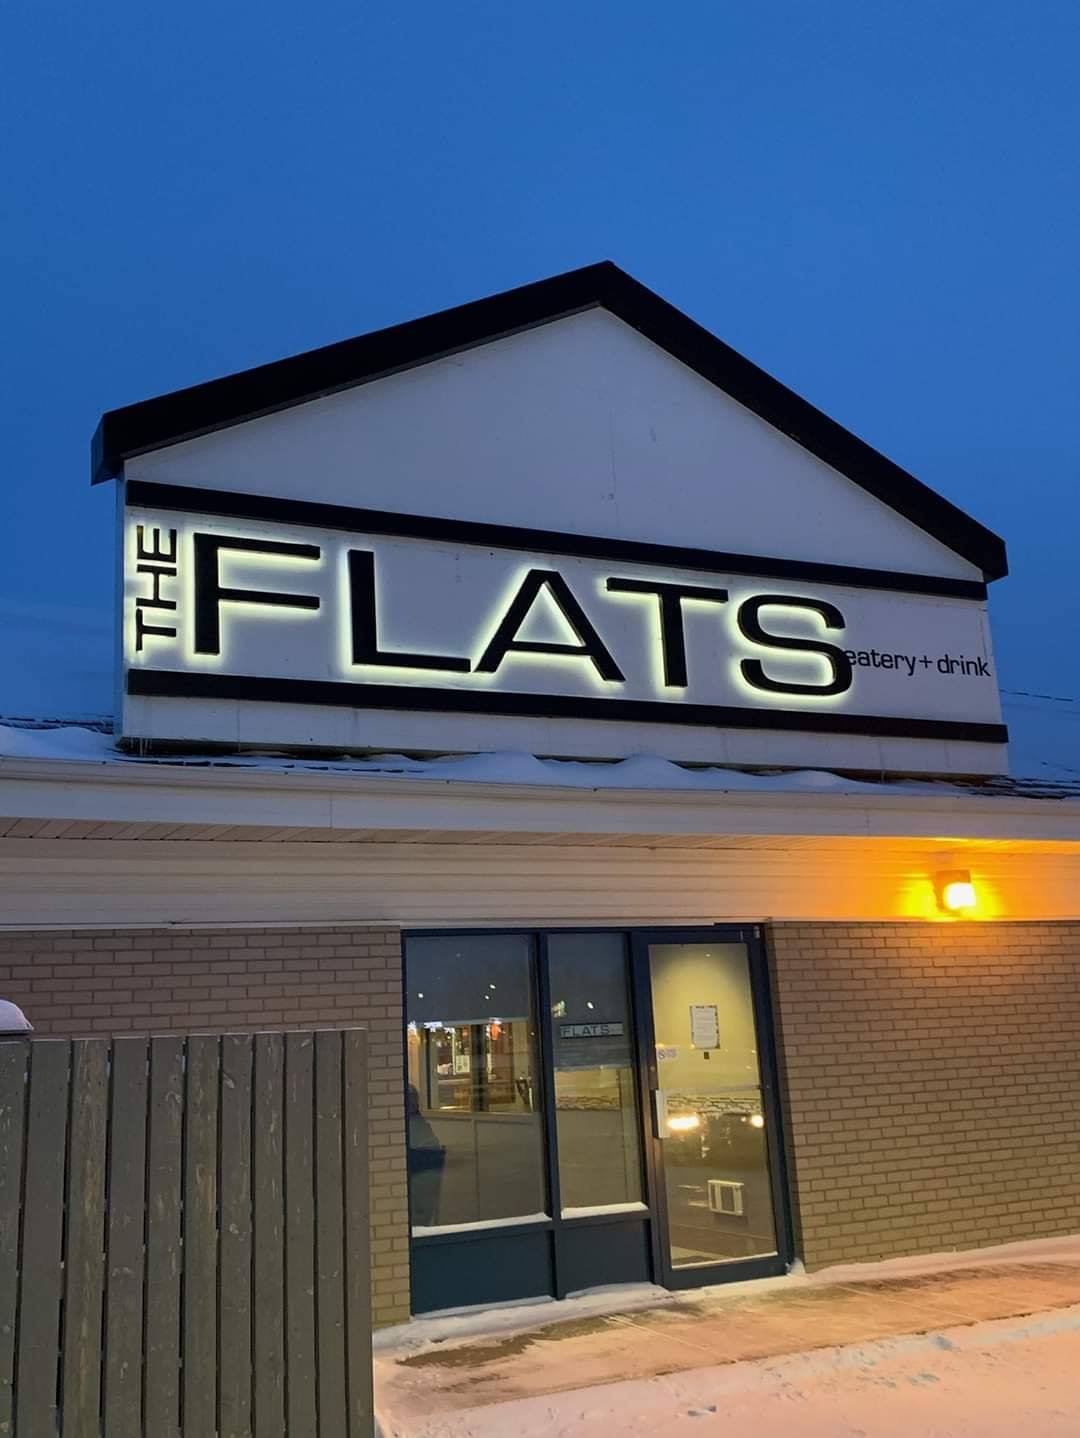 The Flats Eatery + Drink